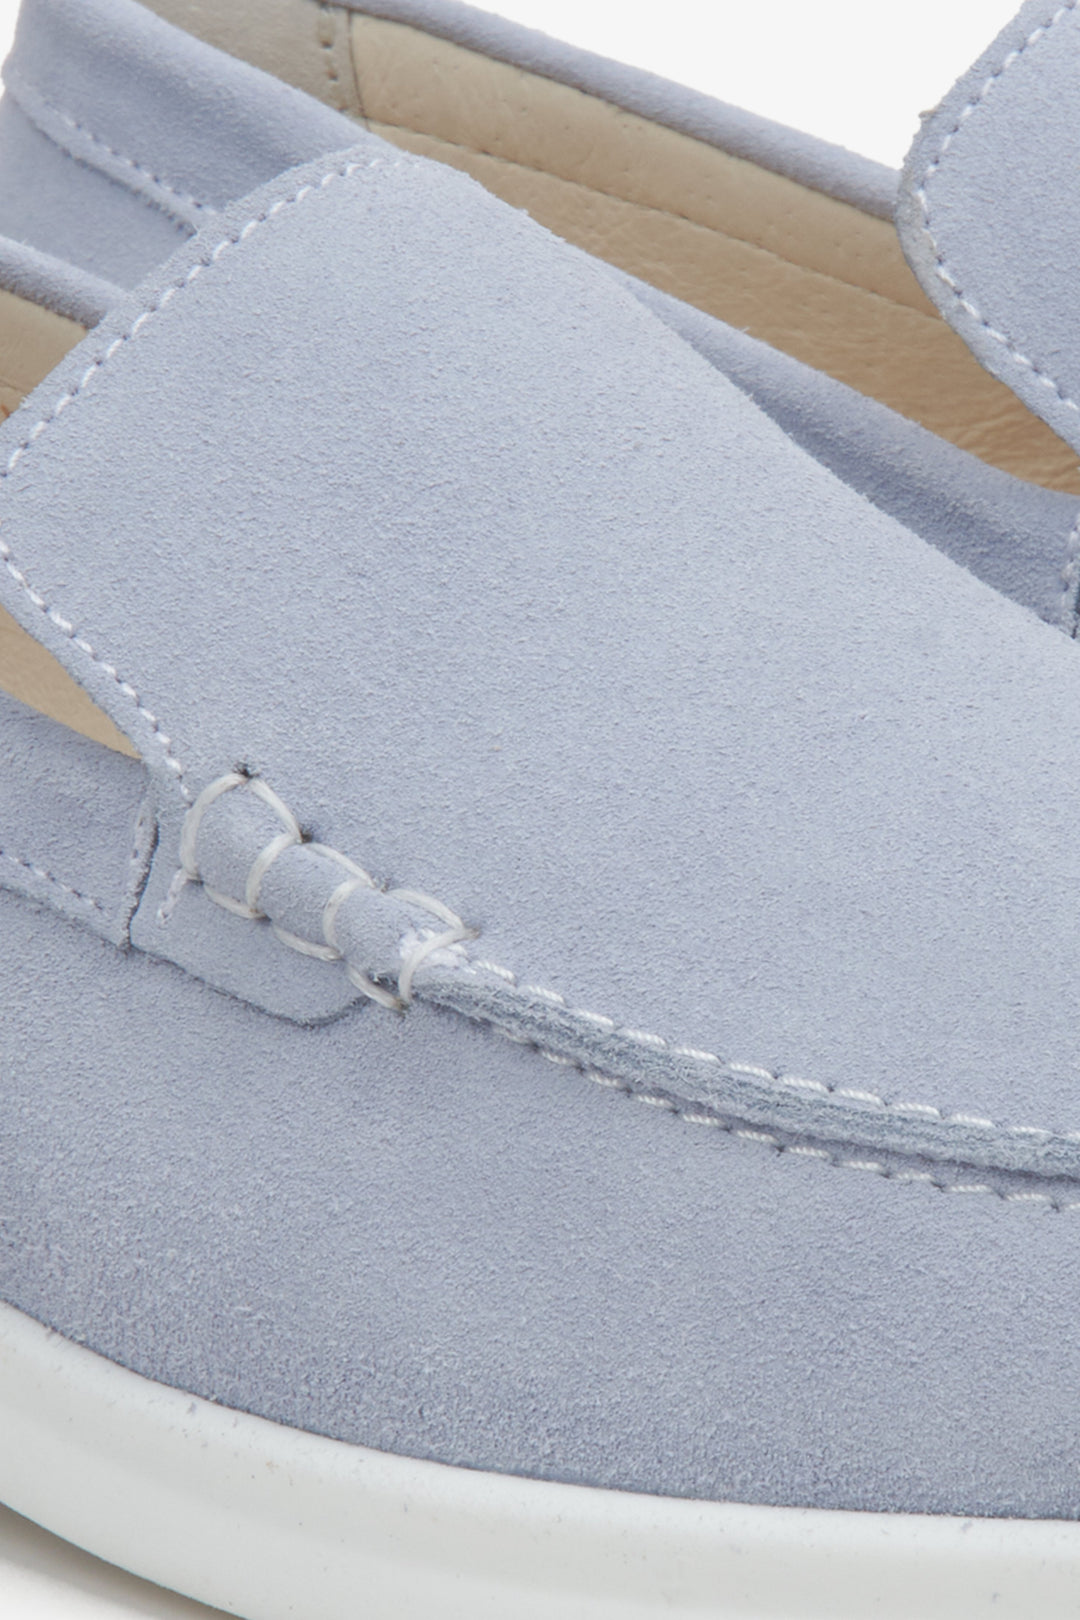 Women's light blue suede Estro moccasins - close-up of the sewing system.